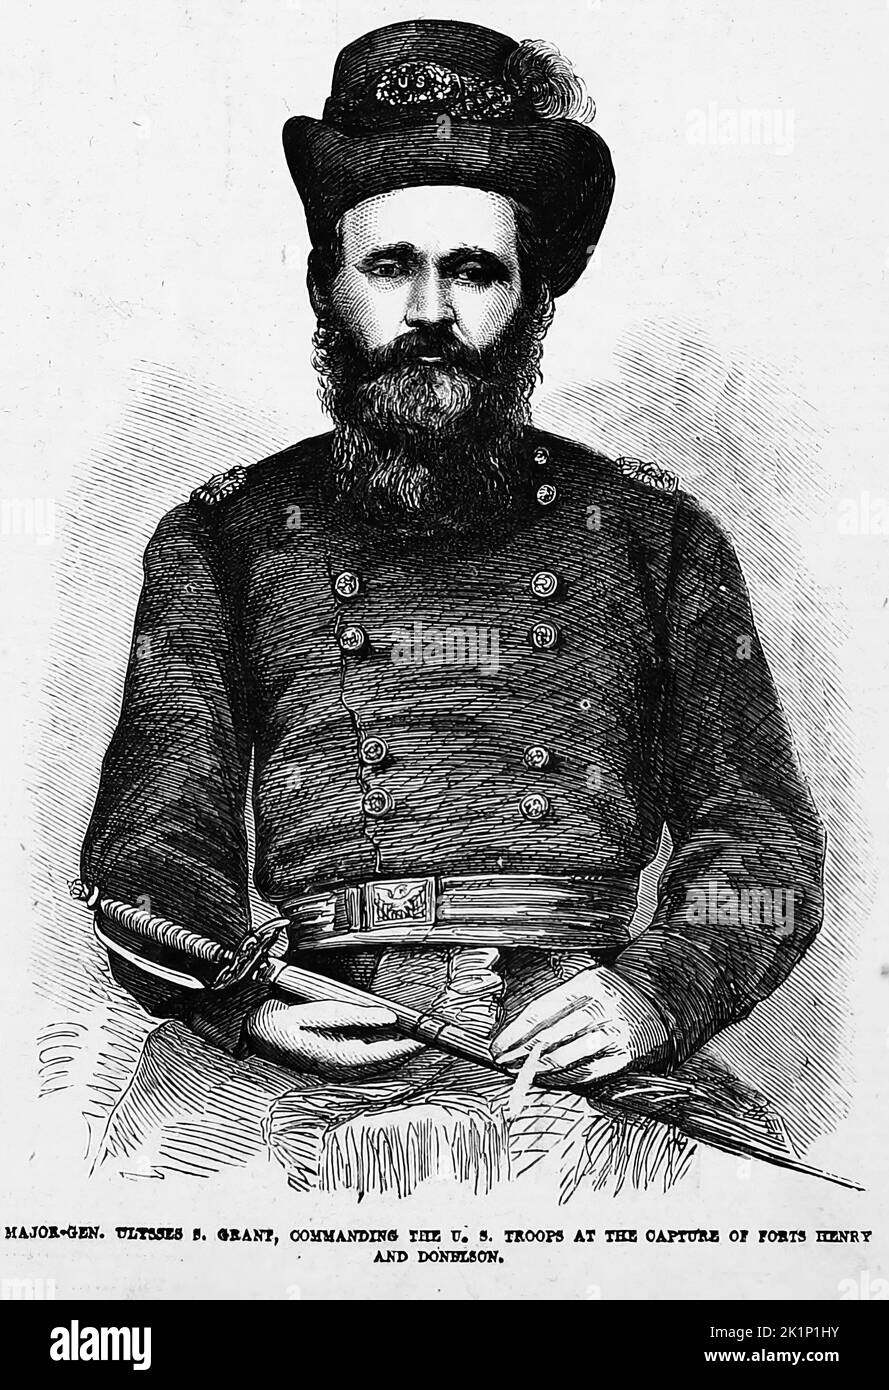 Portrait of General Ulysses S. Grant, commanding the U. S. troops at the capture of Forts Henry and Donelson. 1862. 19th century American Civil War illustration from Frank Leslie's Illustrated Newspaper Stock Photo